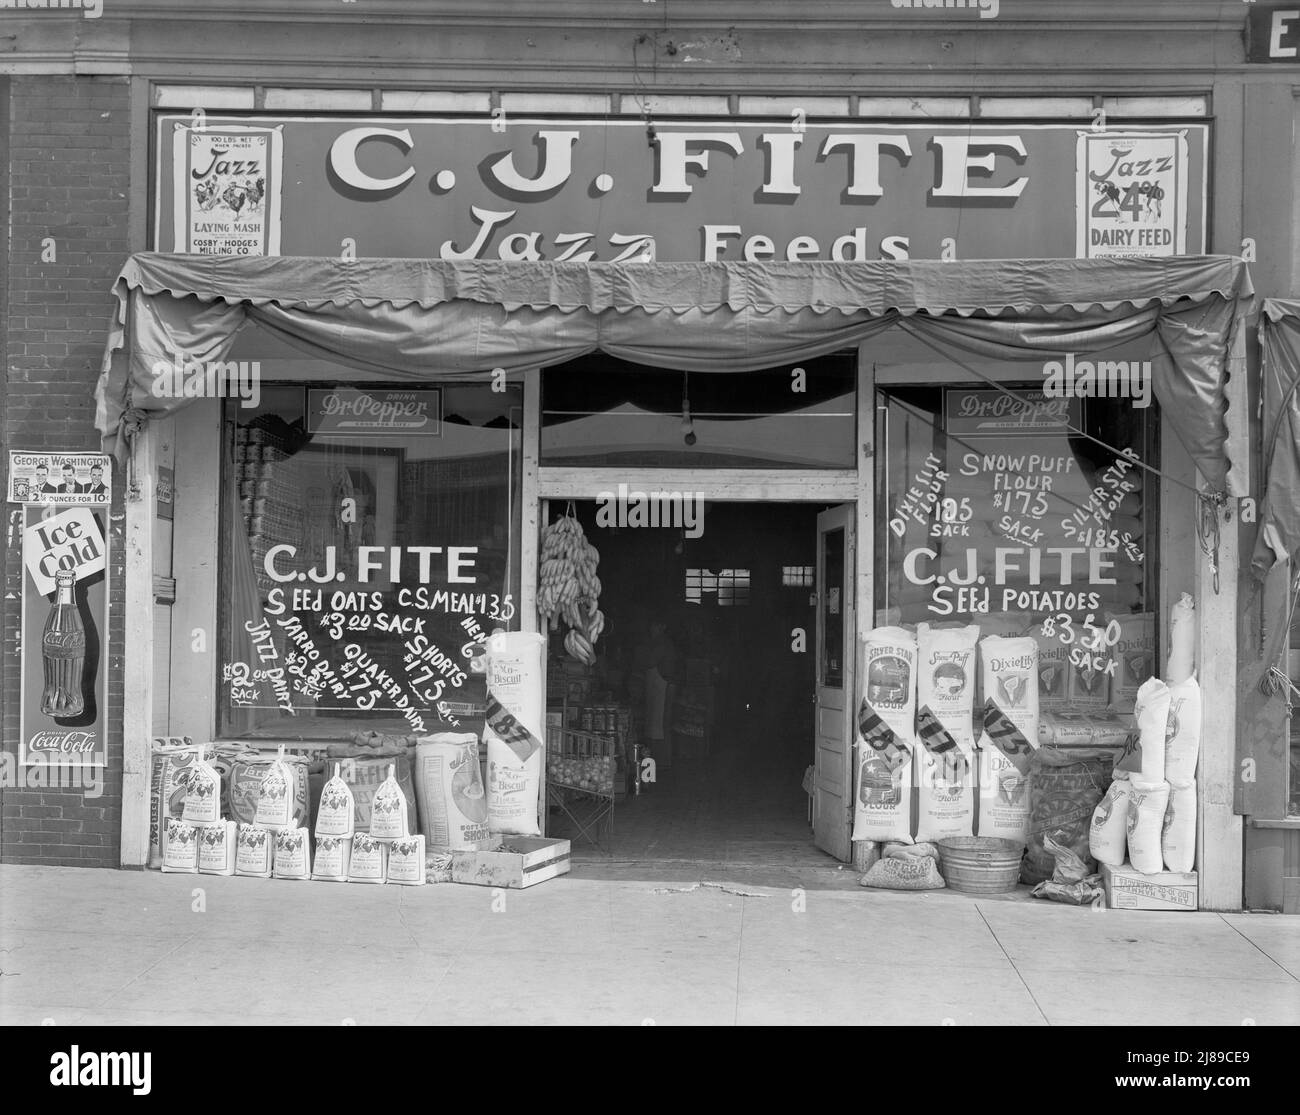 Alabama feed store front. ['C.J. Fite - Jazz Feeds', advertising Coca Cola, Dr. Pepper; George Washington tobacco. Selling Jazz growing mash and all mash starter; seed oats; flour; potatoes; bananas; Silver Star, Snow Puff and Dixie Lily flour, Stock Photo